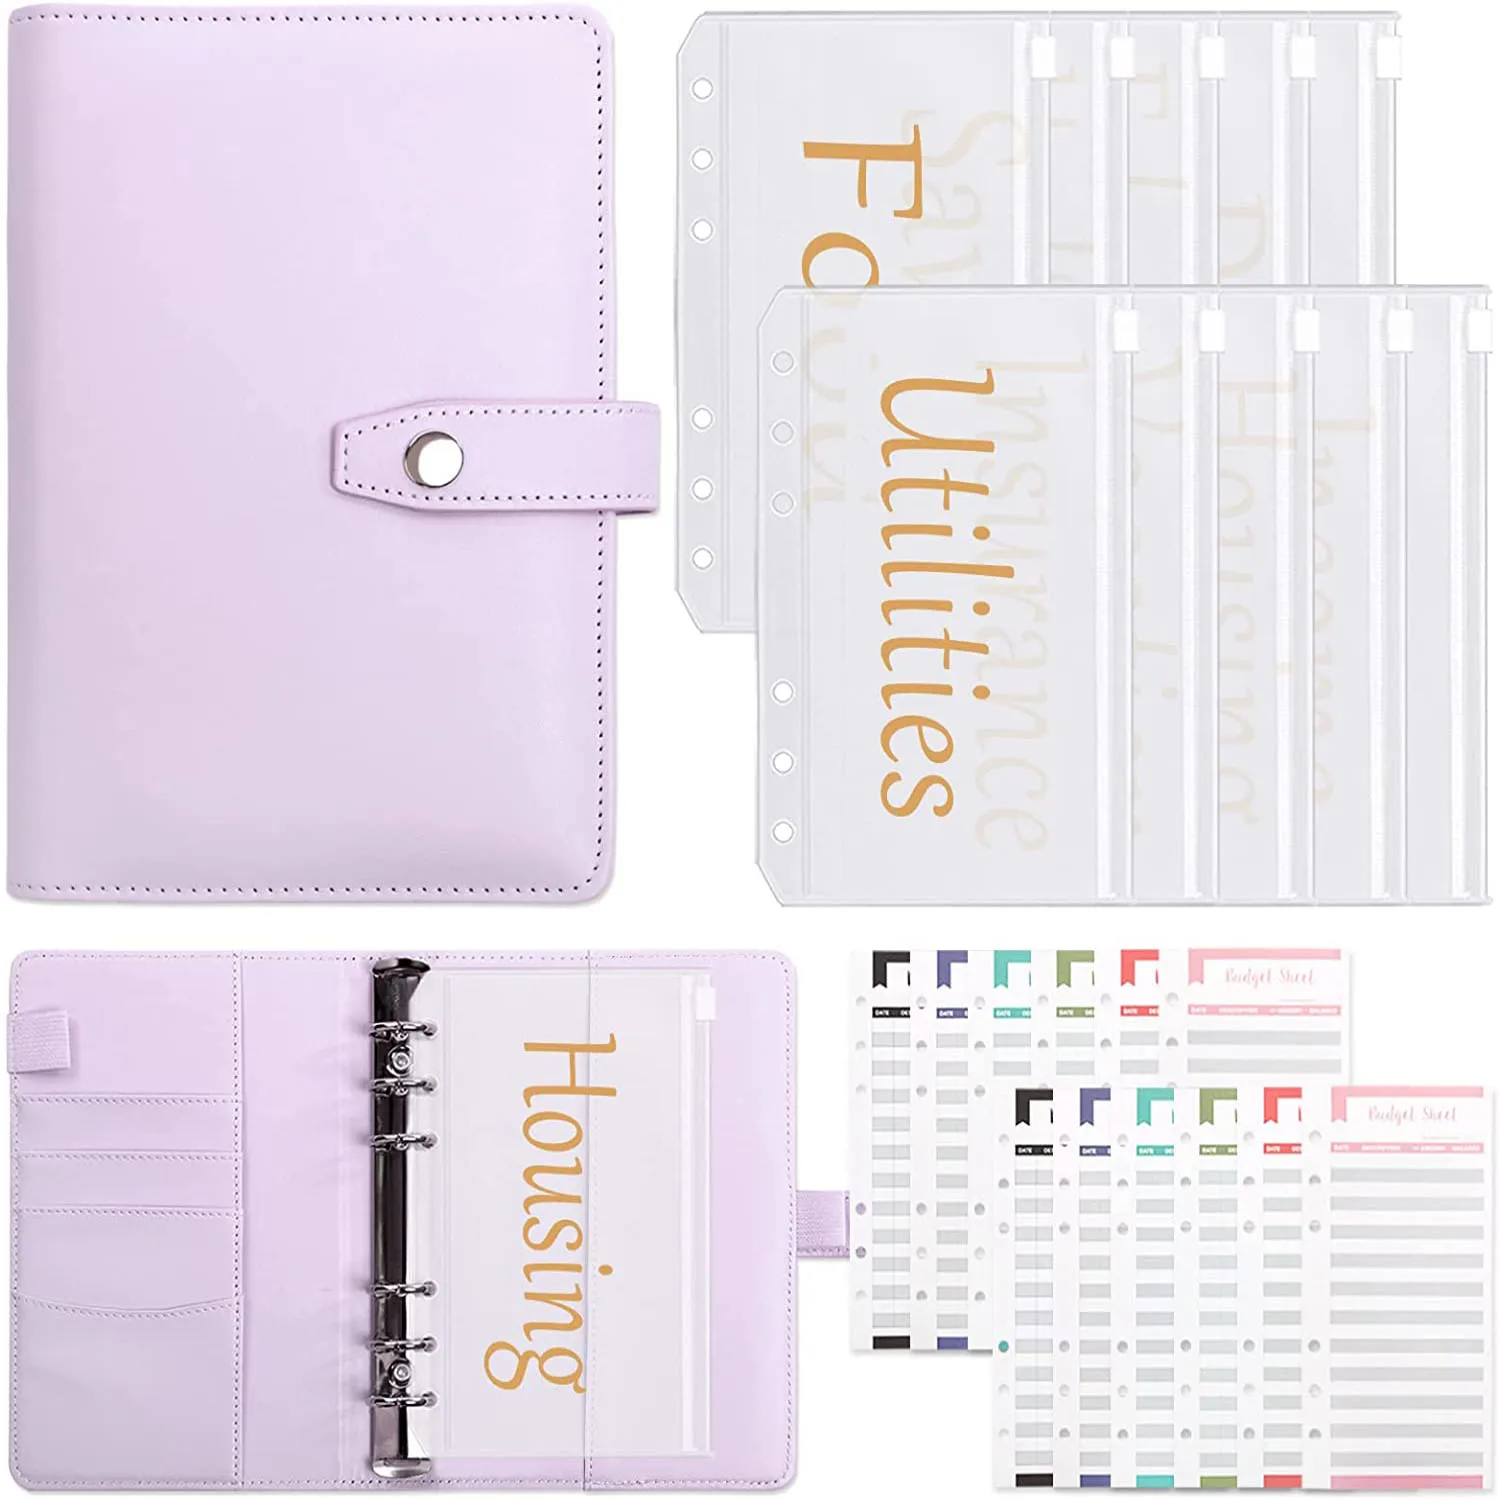 A6 Budget Binder with 10pcs Pre-printed Cash Envelopes for Budgeting,12 Expense Budget Sheets,Planner Organizer for Saving Money a5 size pu leather binder budget planner organizer with 12pcs binder pockets cash envelopes system for budgeting money saving